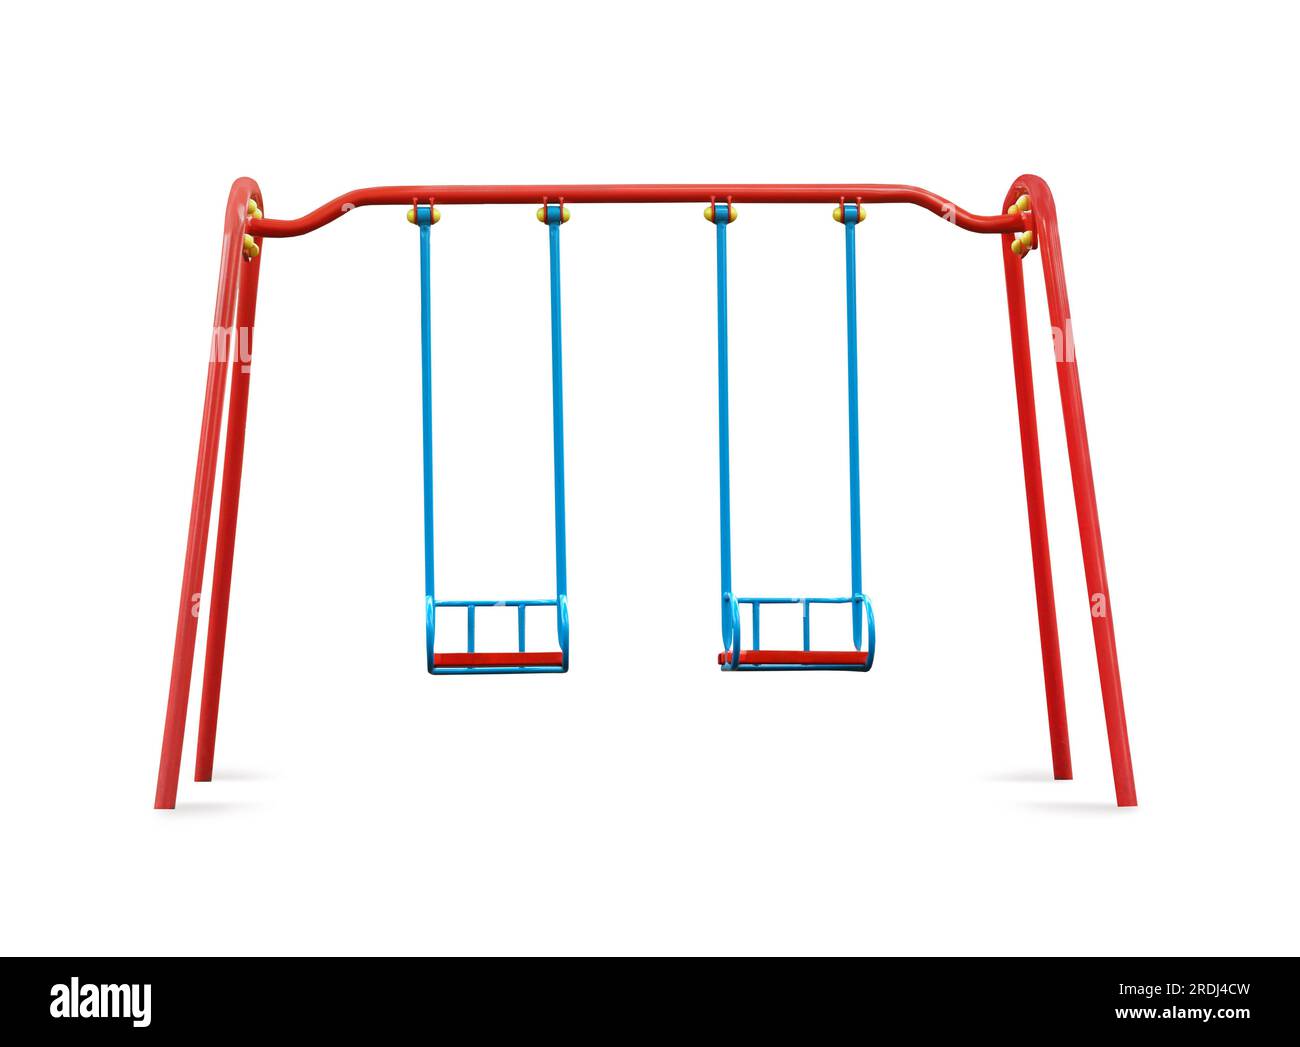 Colorful swings isolated on white. Modern playground equipment Stock Photo